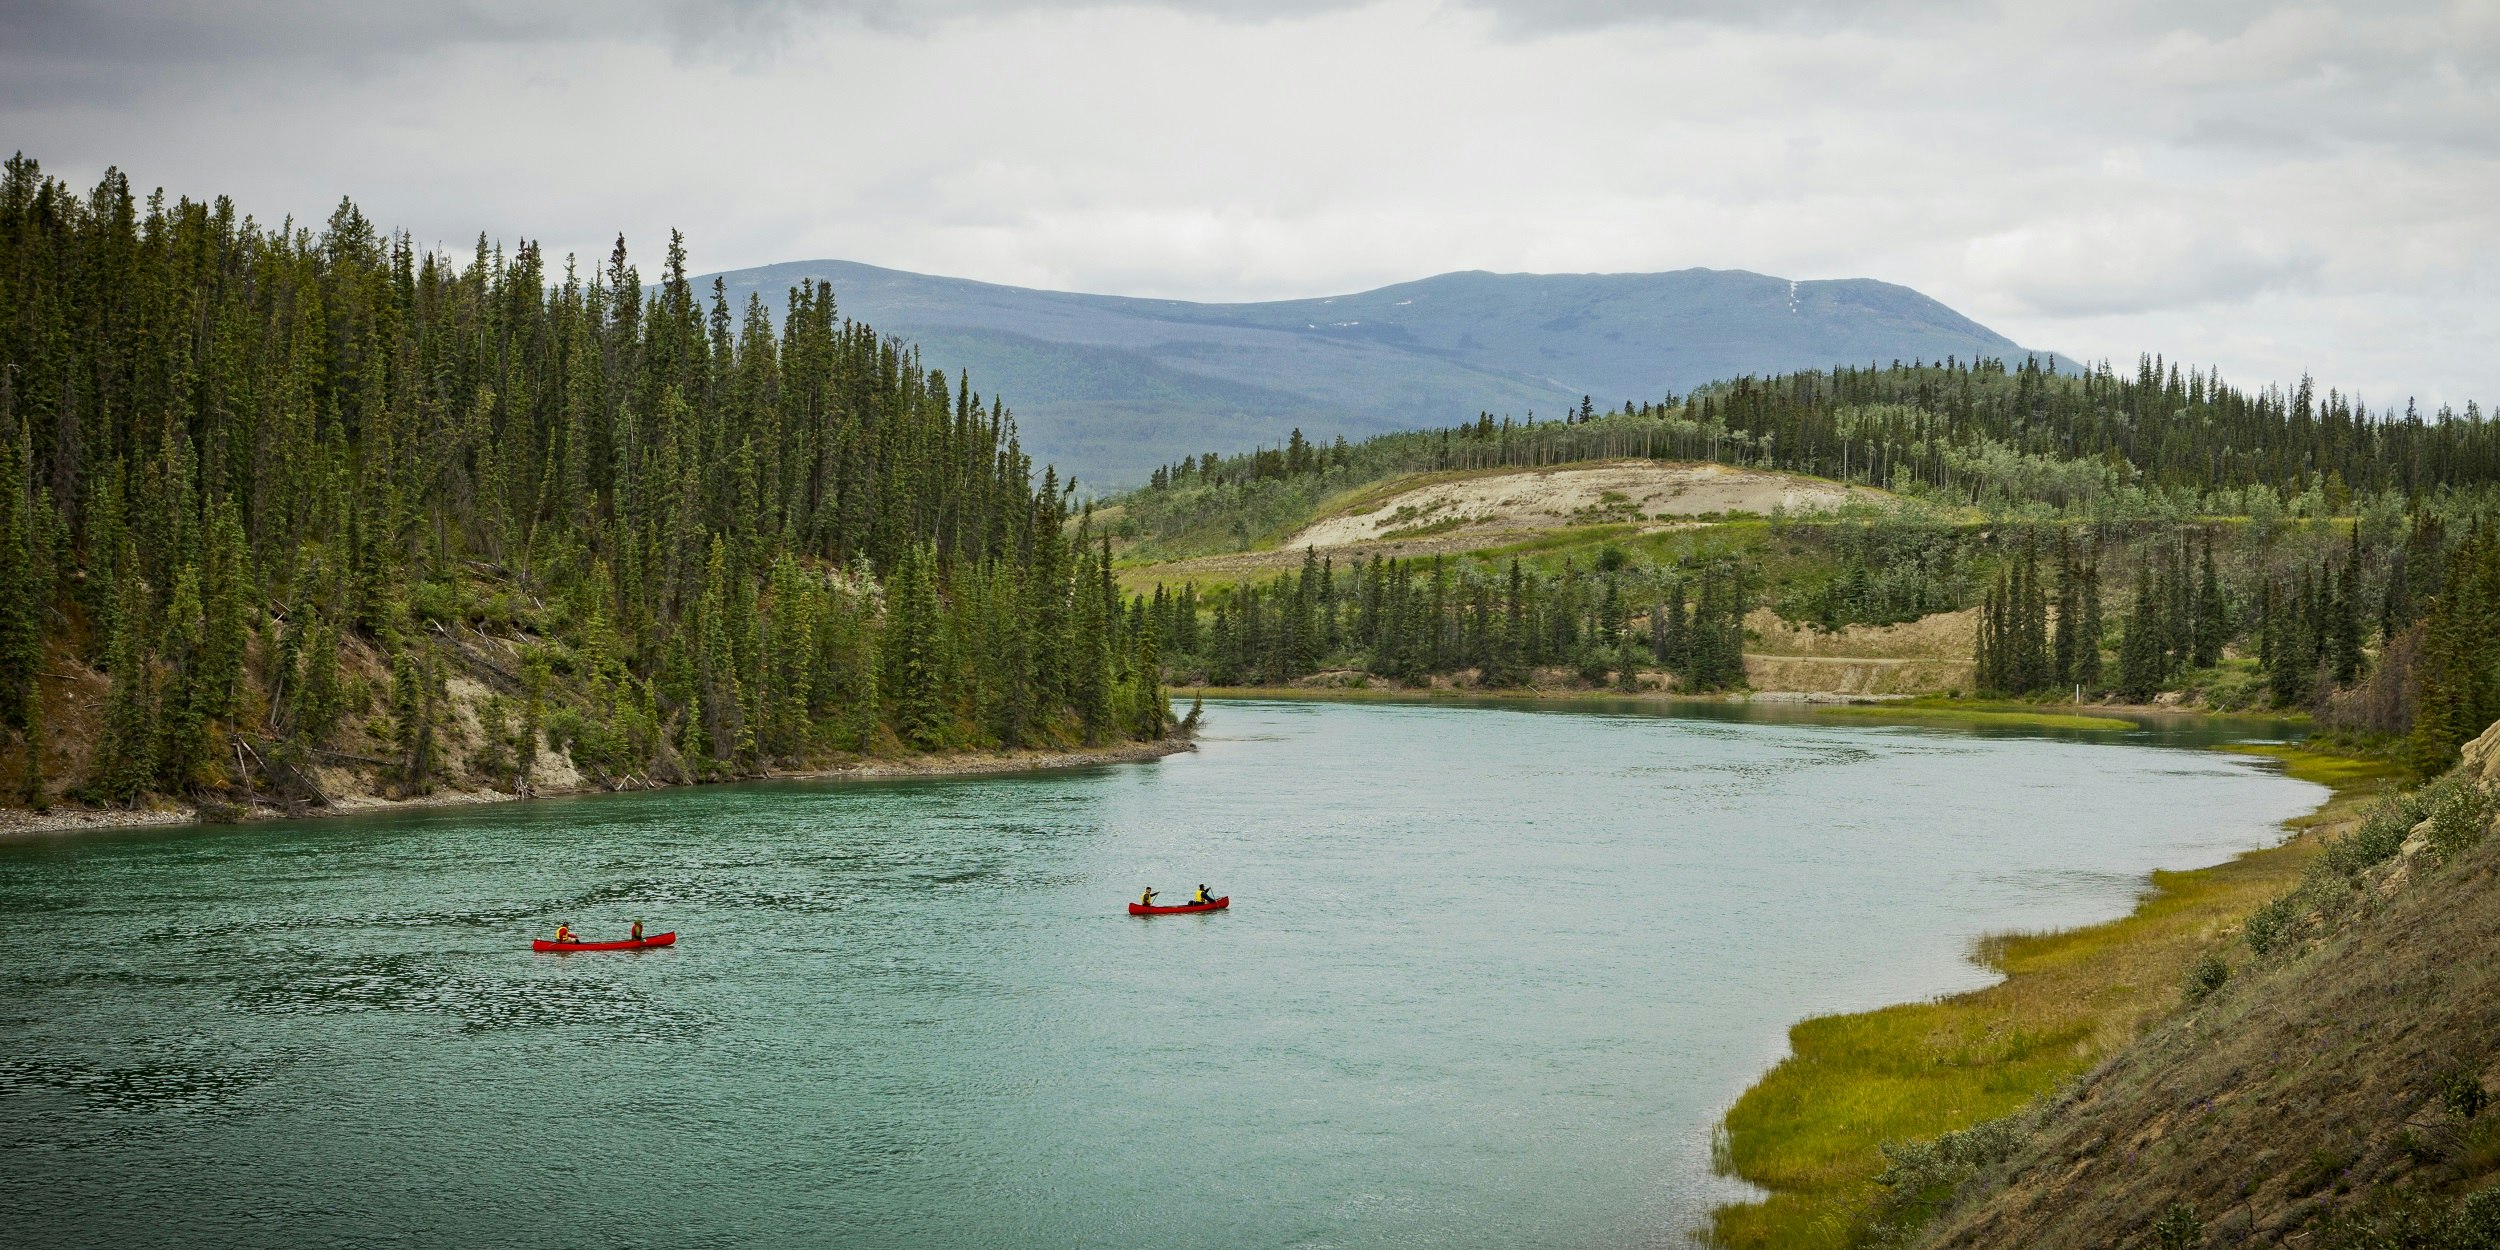 Shot from high on the Yukon River's bank, two canoes are seen navigating a large bend in the river; both banks are covered in stands of trees, with rollling hills in the distance